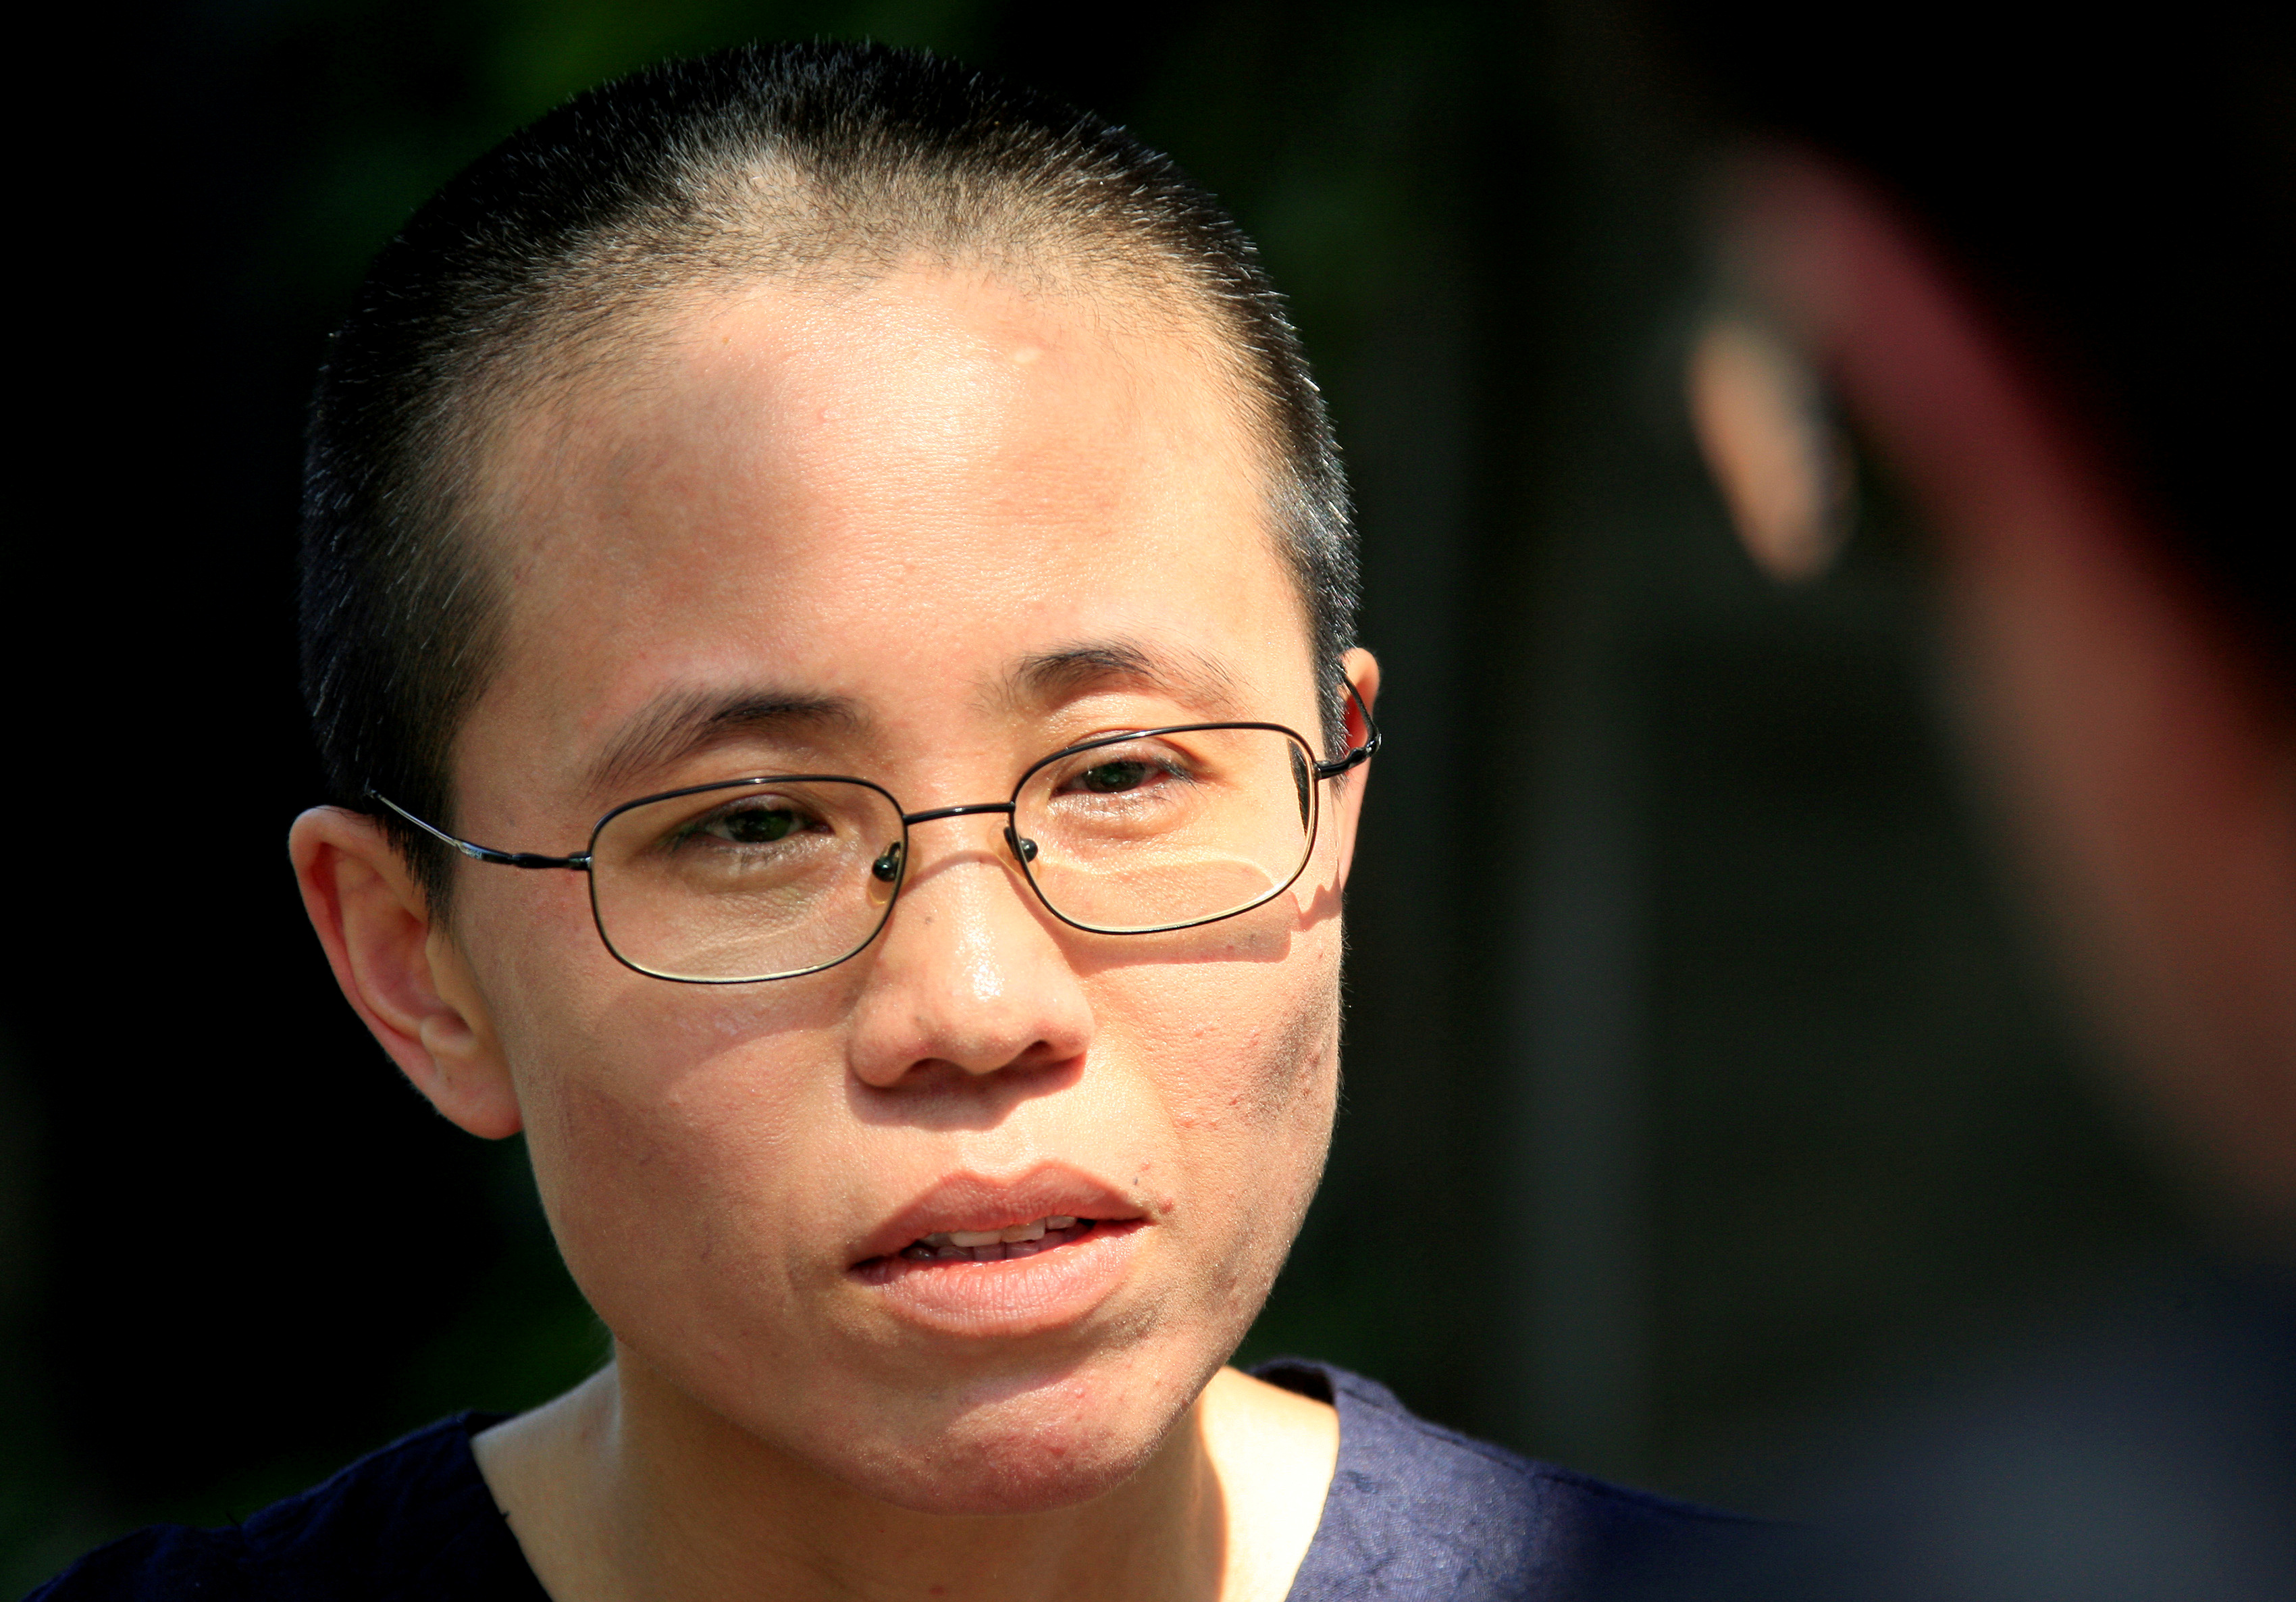 FILE PHOTO - Liu Xia, wife of veteran Chinese pro-democracy activist Liu Xiaobo, listens to a question during an interview in Beijing